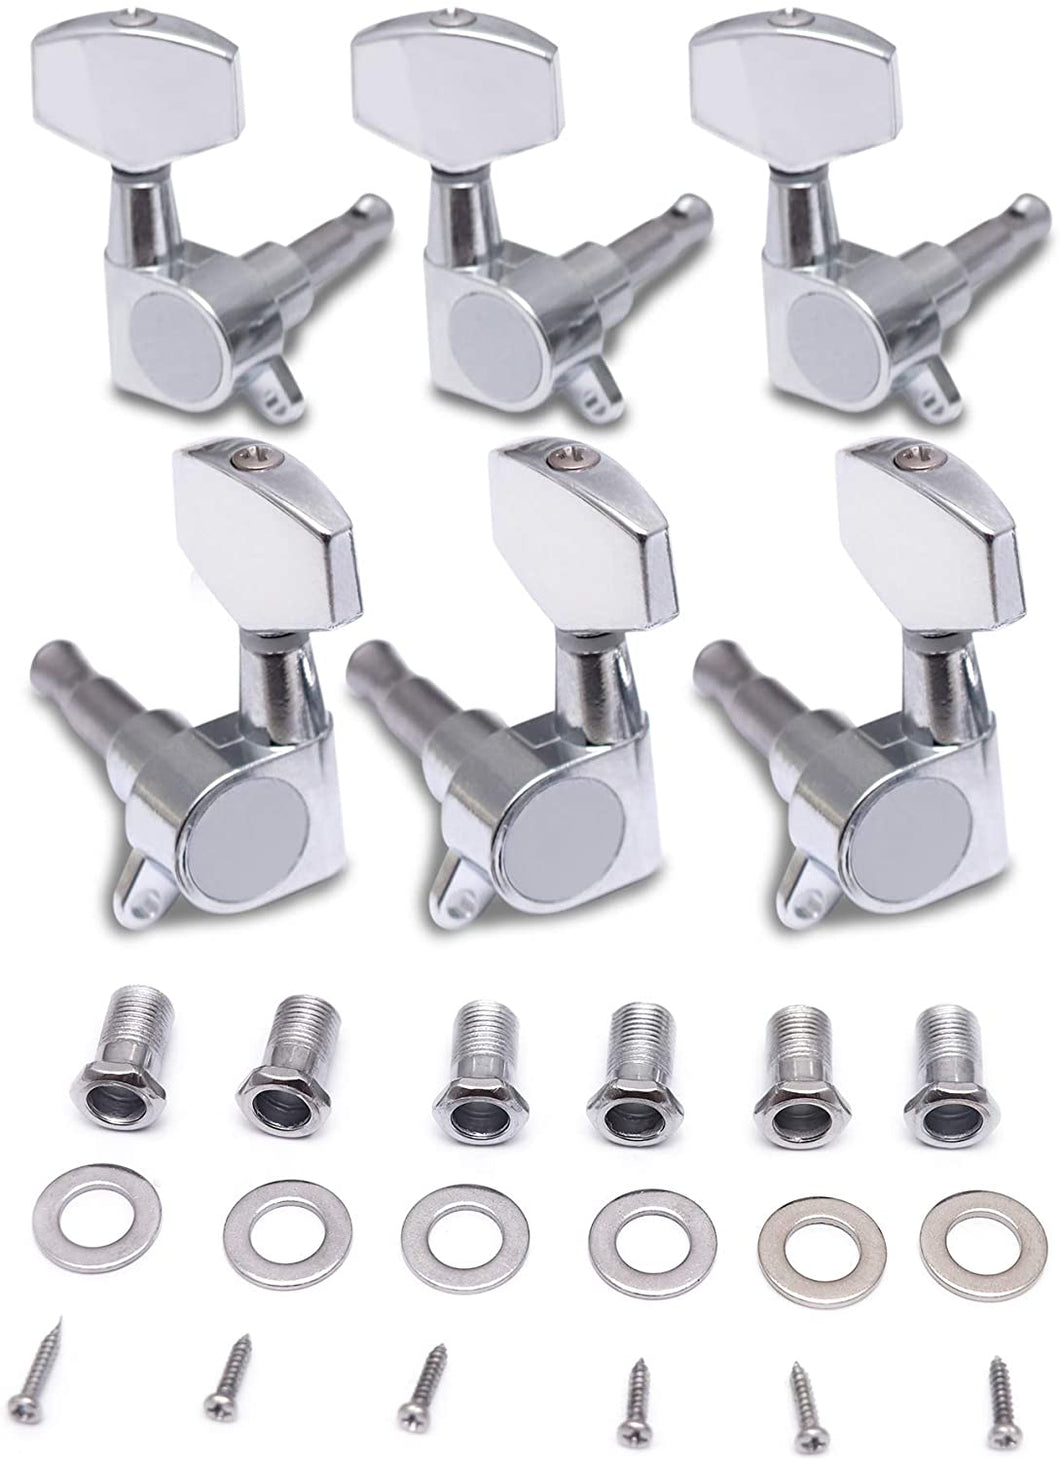 Sealed String Tuning Pegs Keys Machines Heads Tuners 3L 3R Electric Guitar Acoustic Guitar Parts Replacement Chrome.